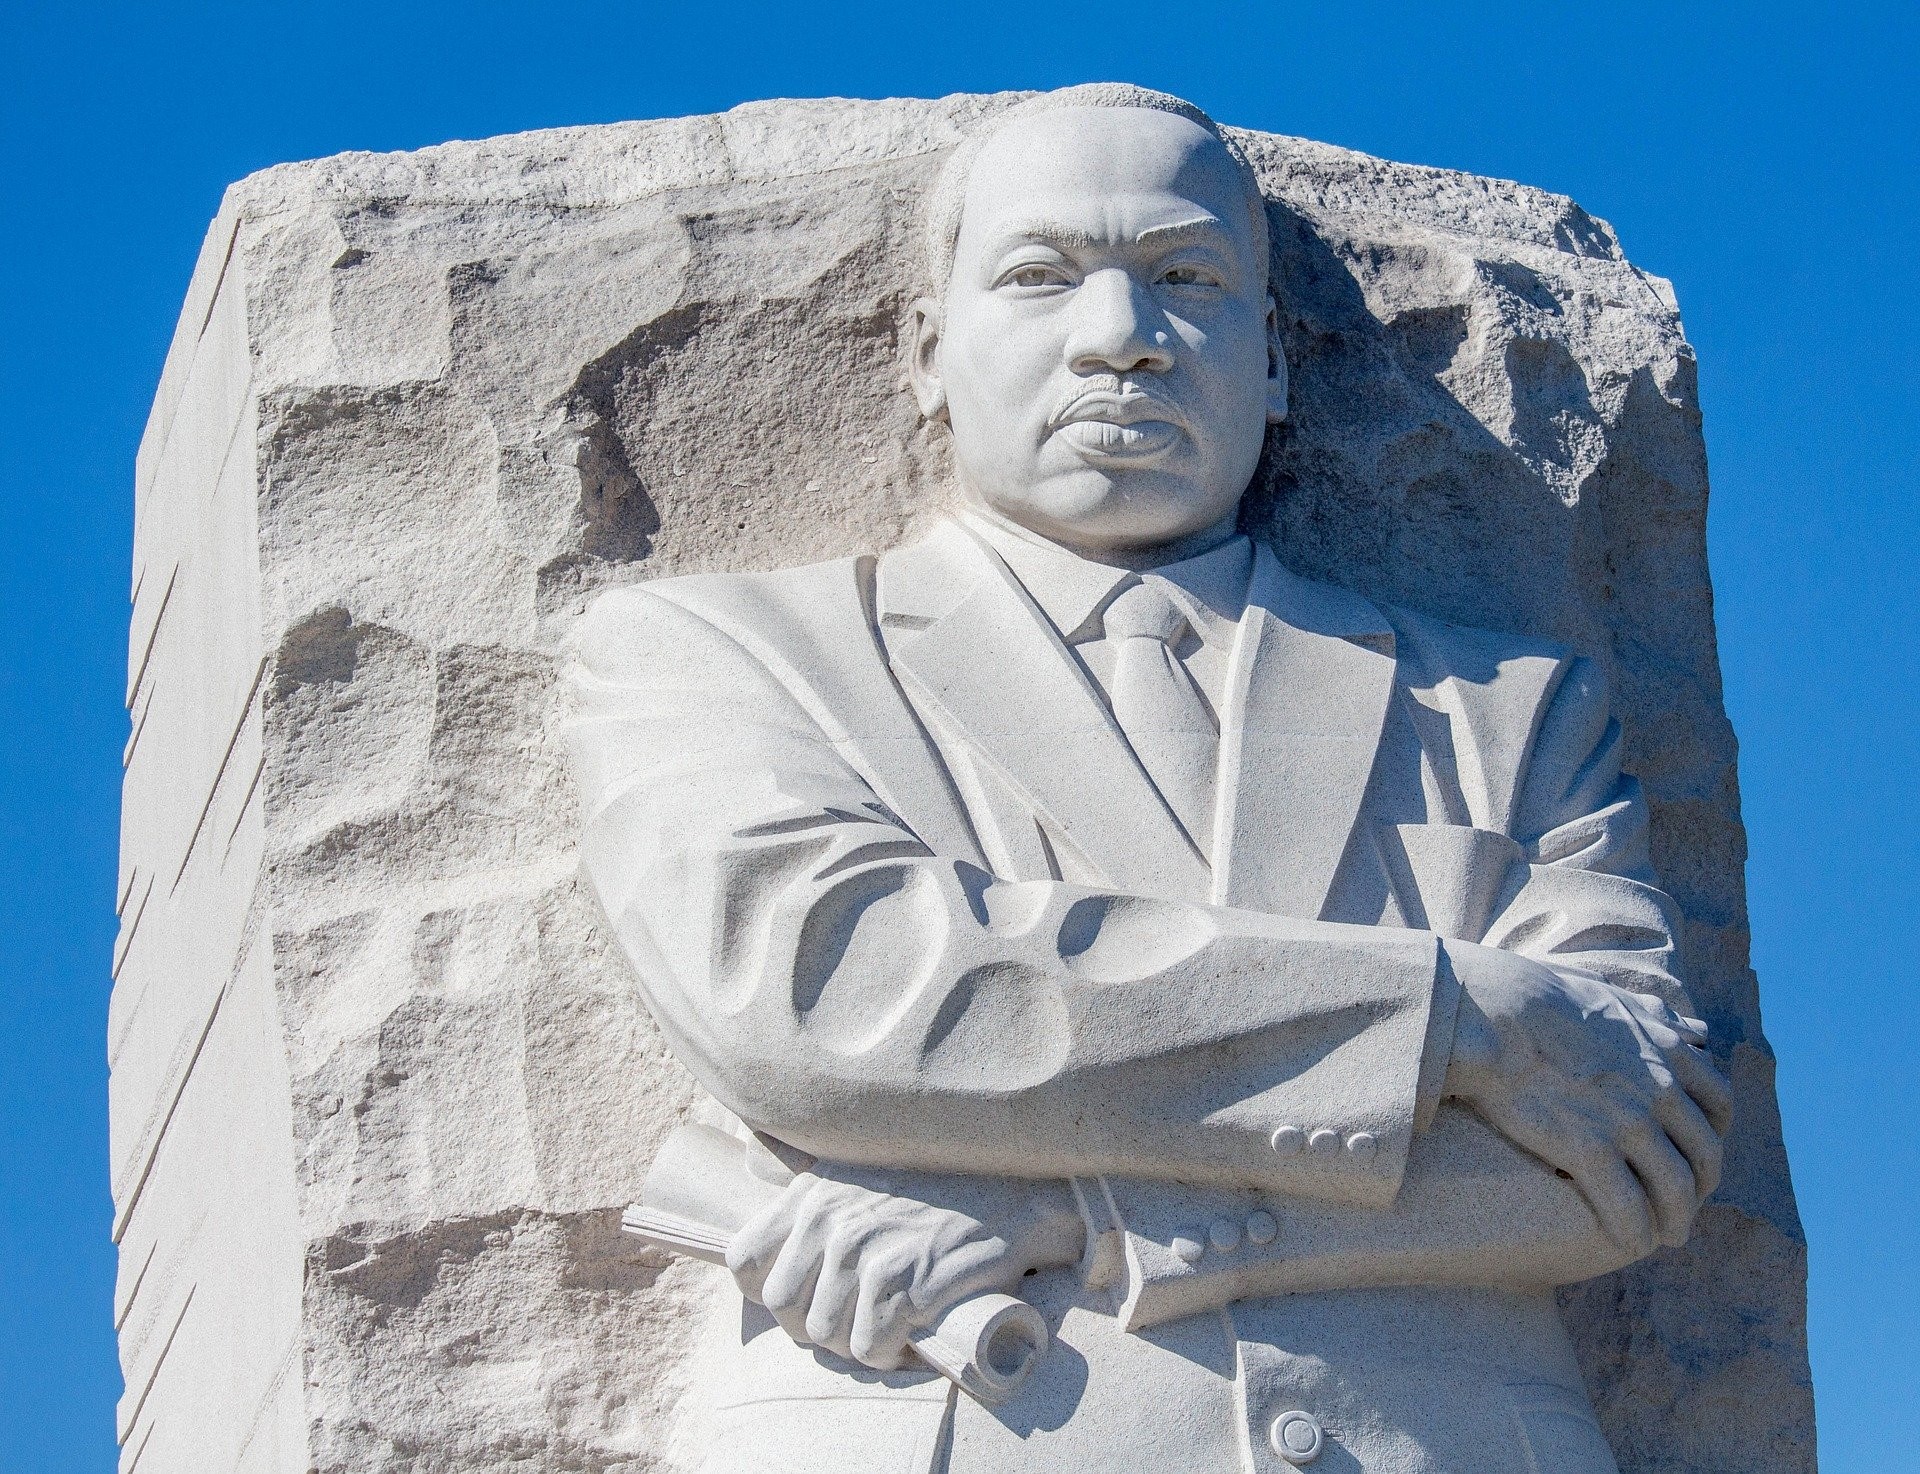 Honoring Dr. King’s Legacy Through Service